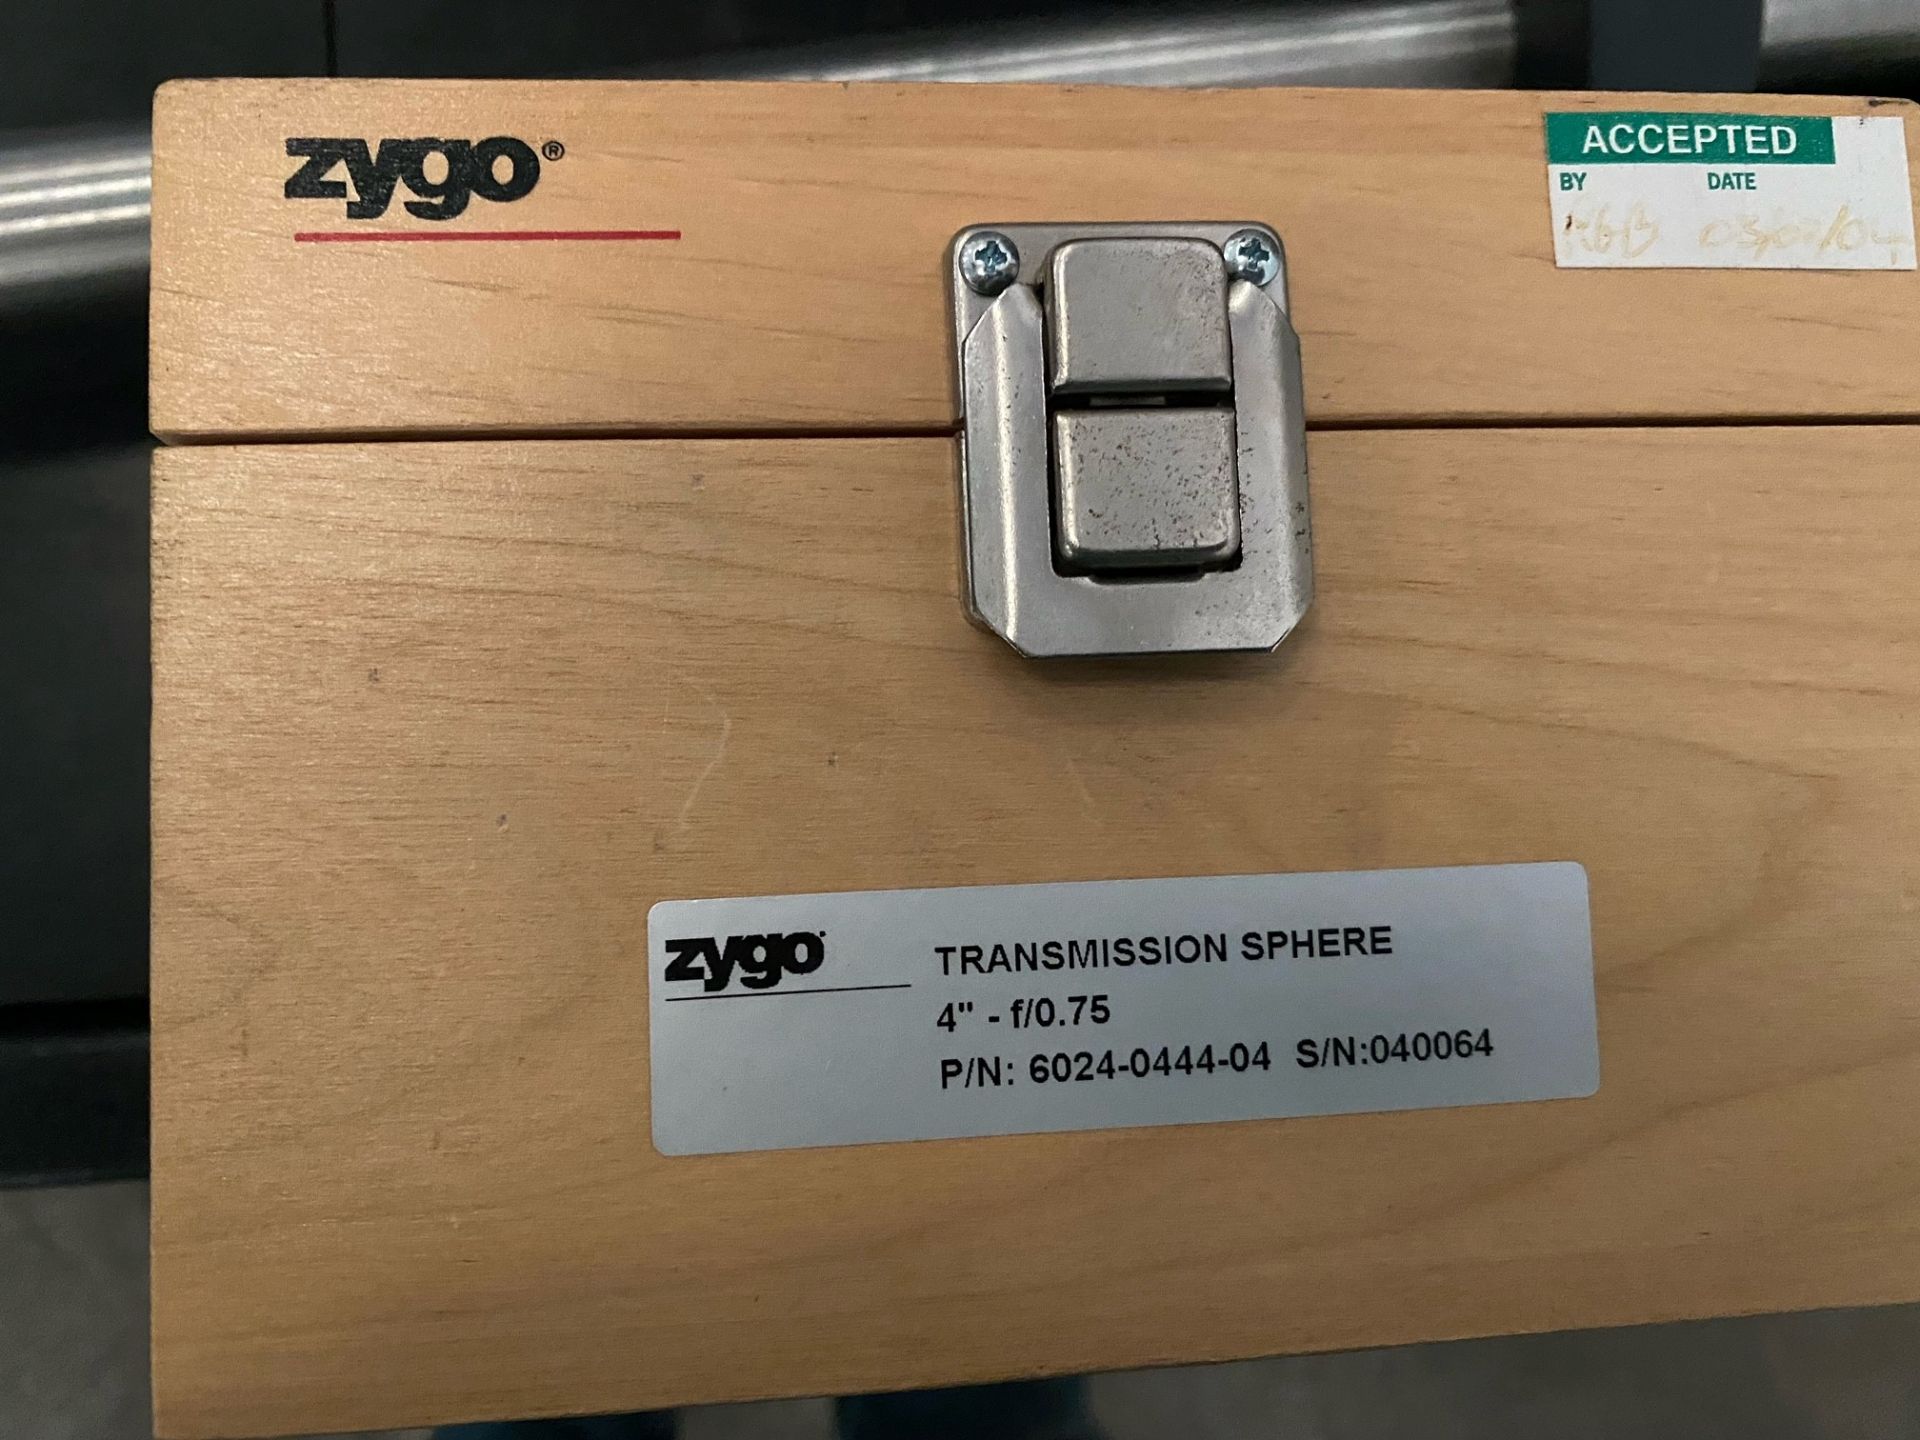 Zygo GPI XP Interferometer, free loading onto purchasers transport - Yes, item located at - Image 6 of 10